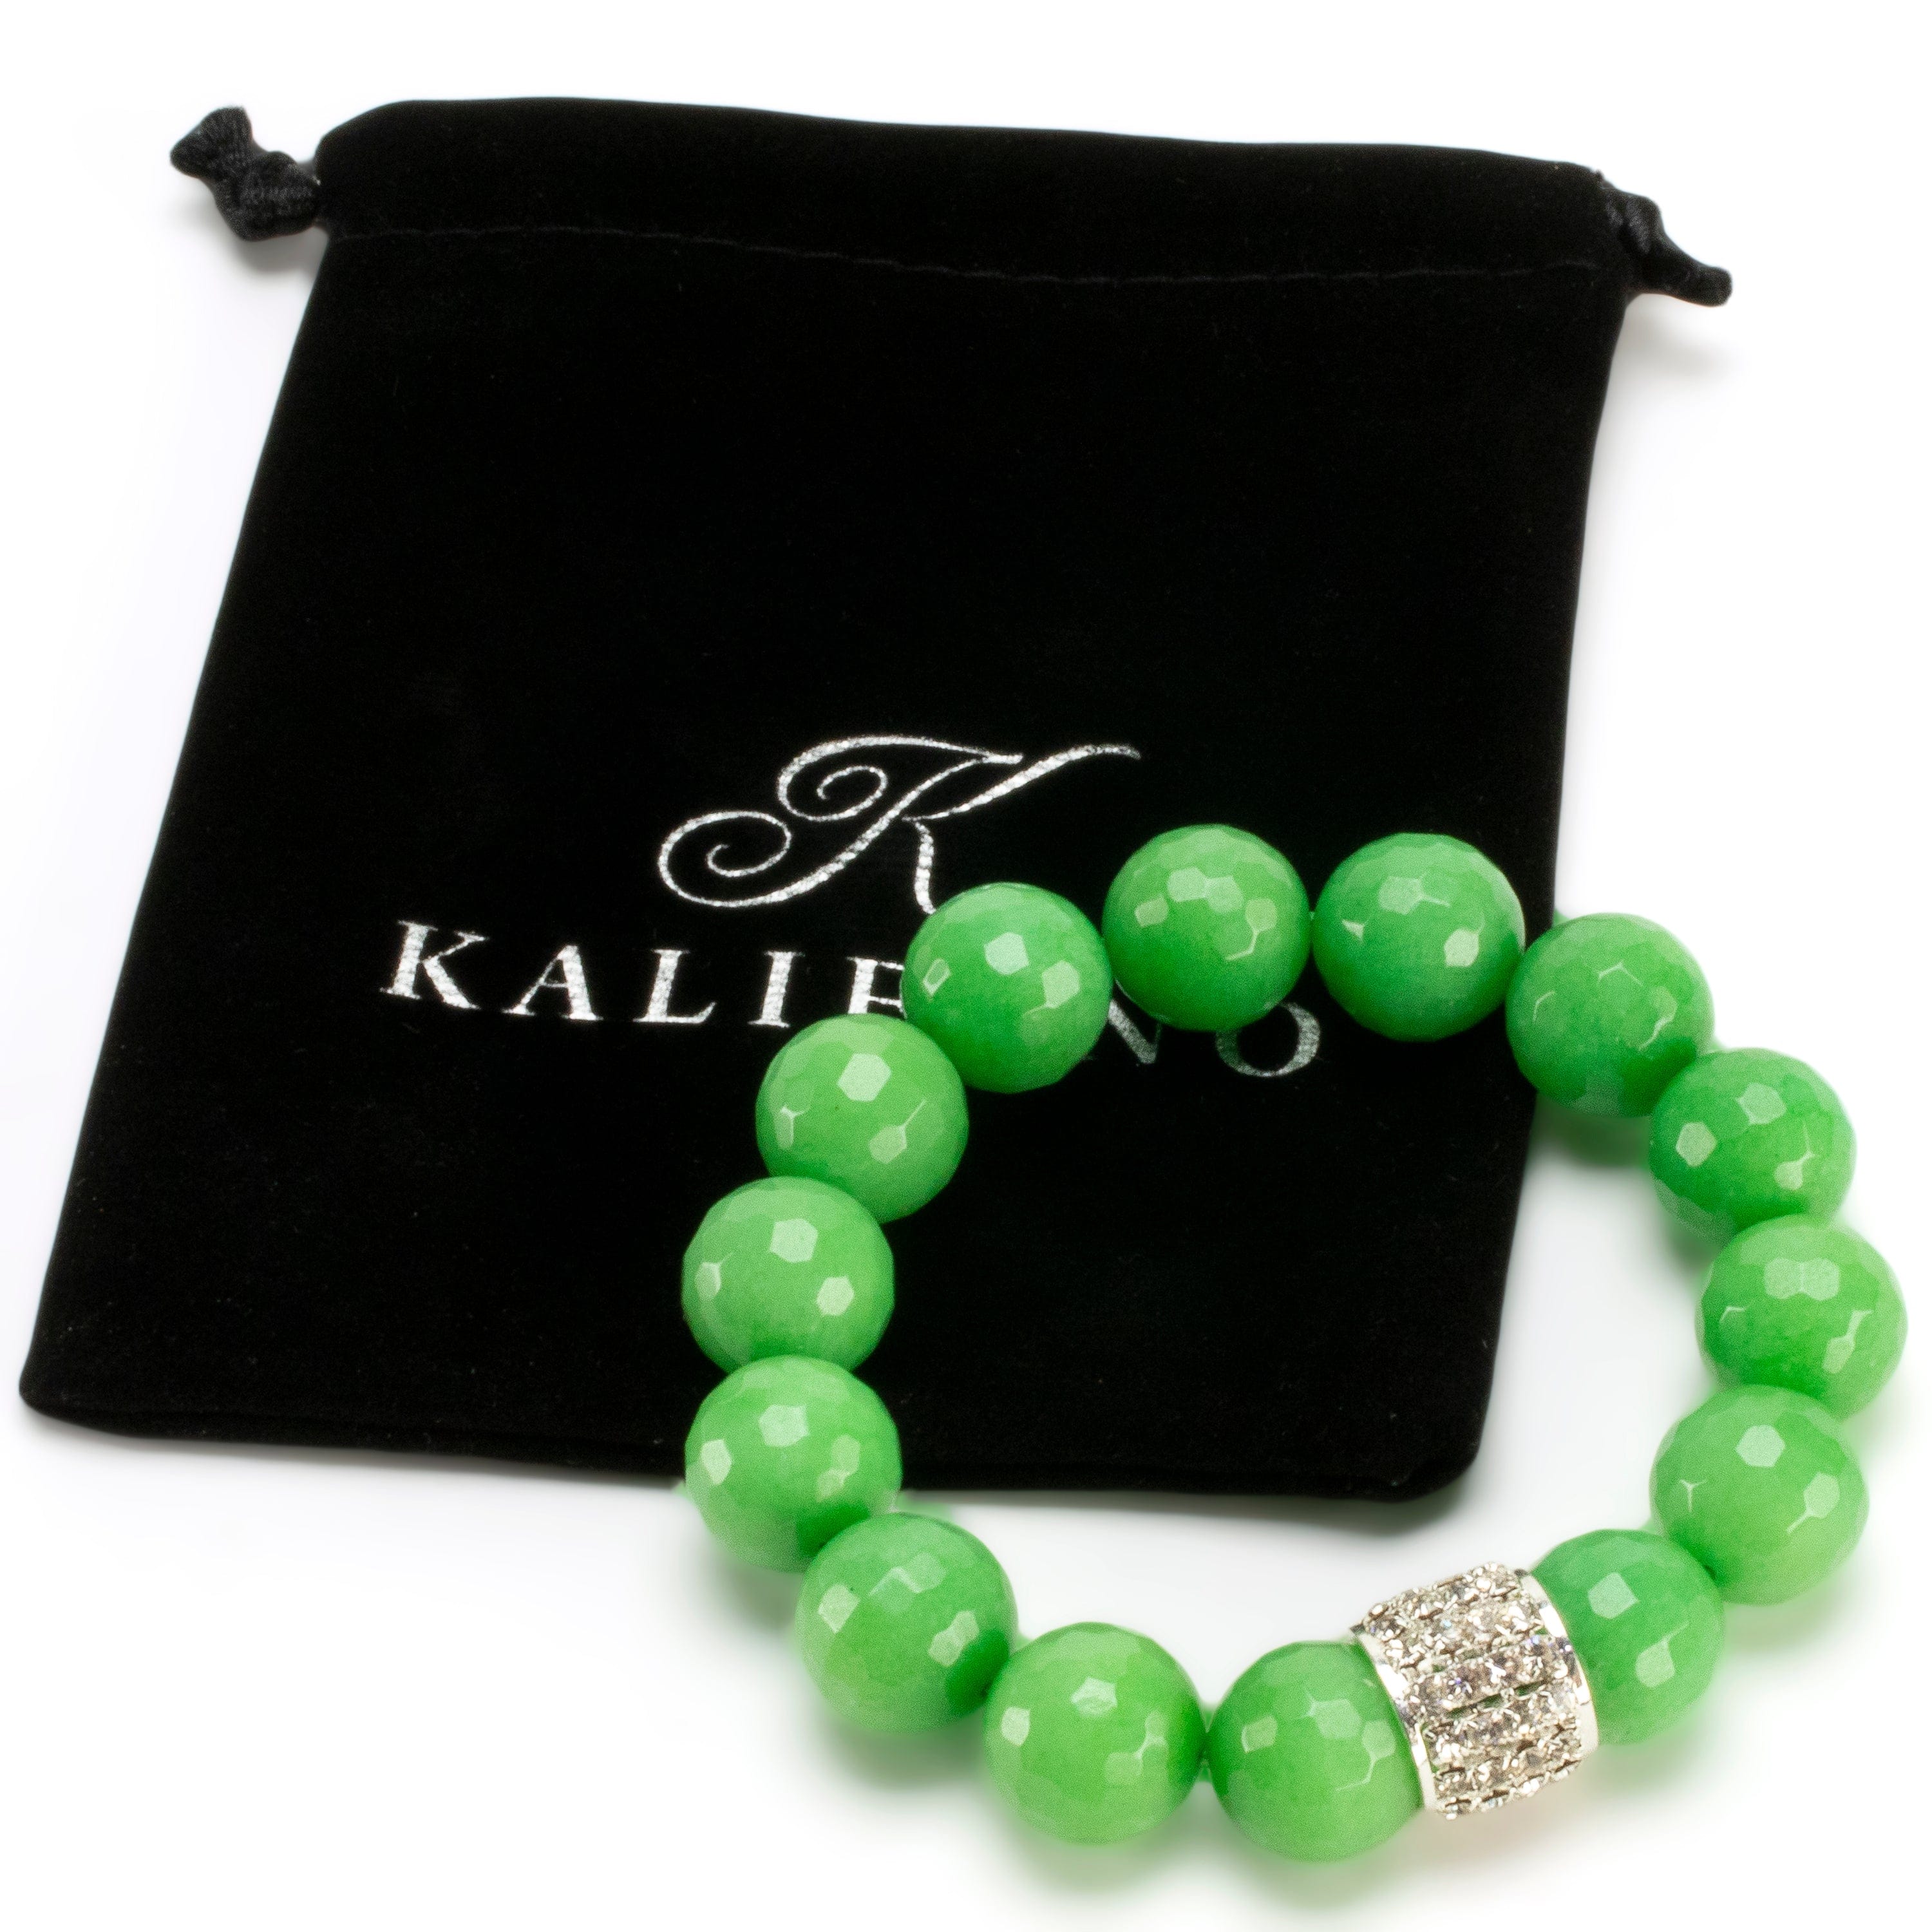 Kalifano Gemstone Bracelets Faceted 14mm Green Color Enhanced Jade with Sparkly Silver Crystal Accent Bead Gemstone Elastic Bracelet RED-BGP-065